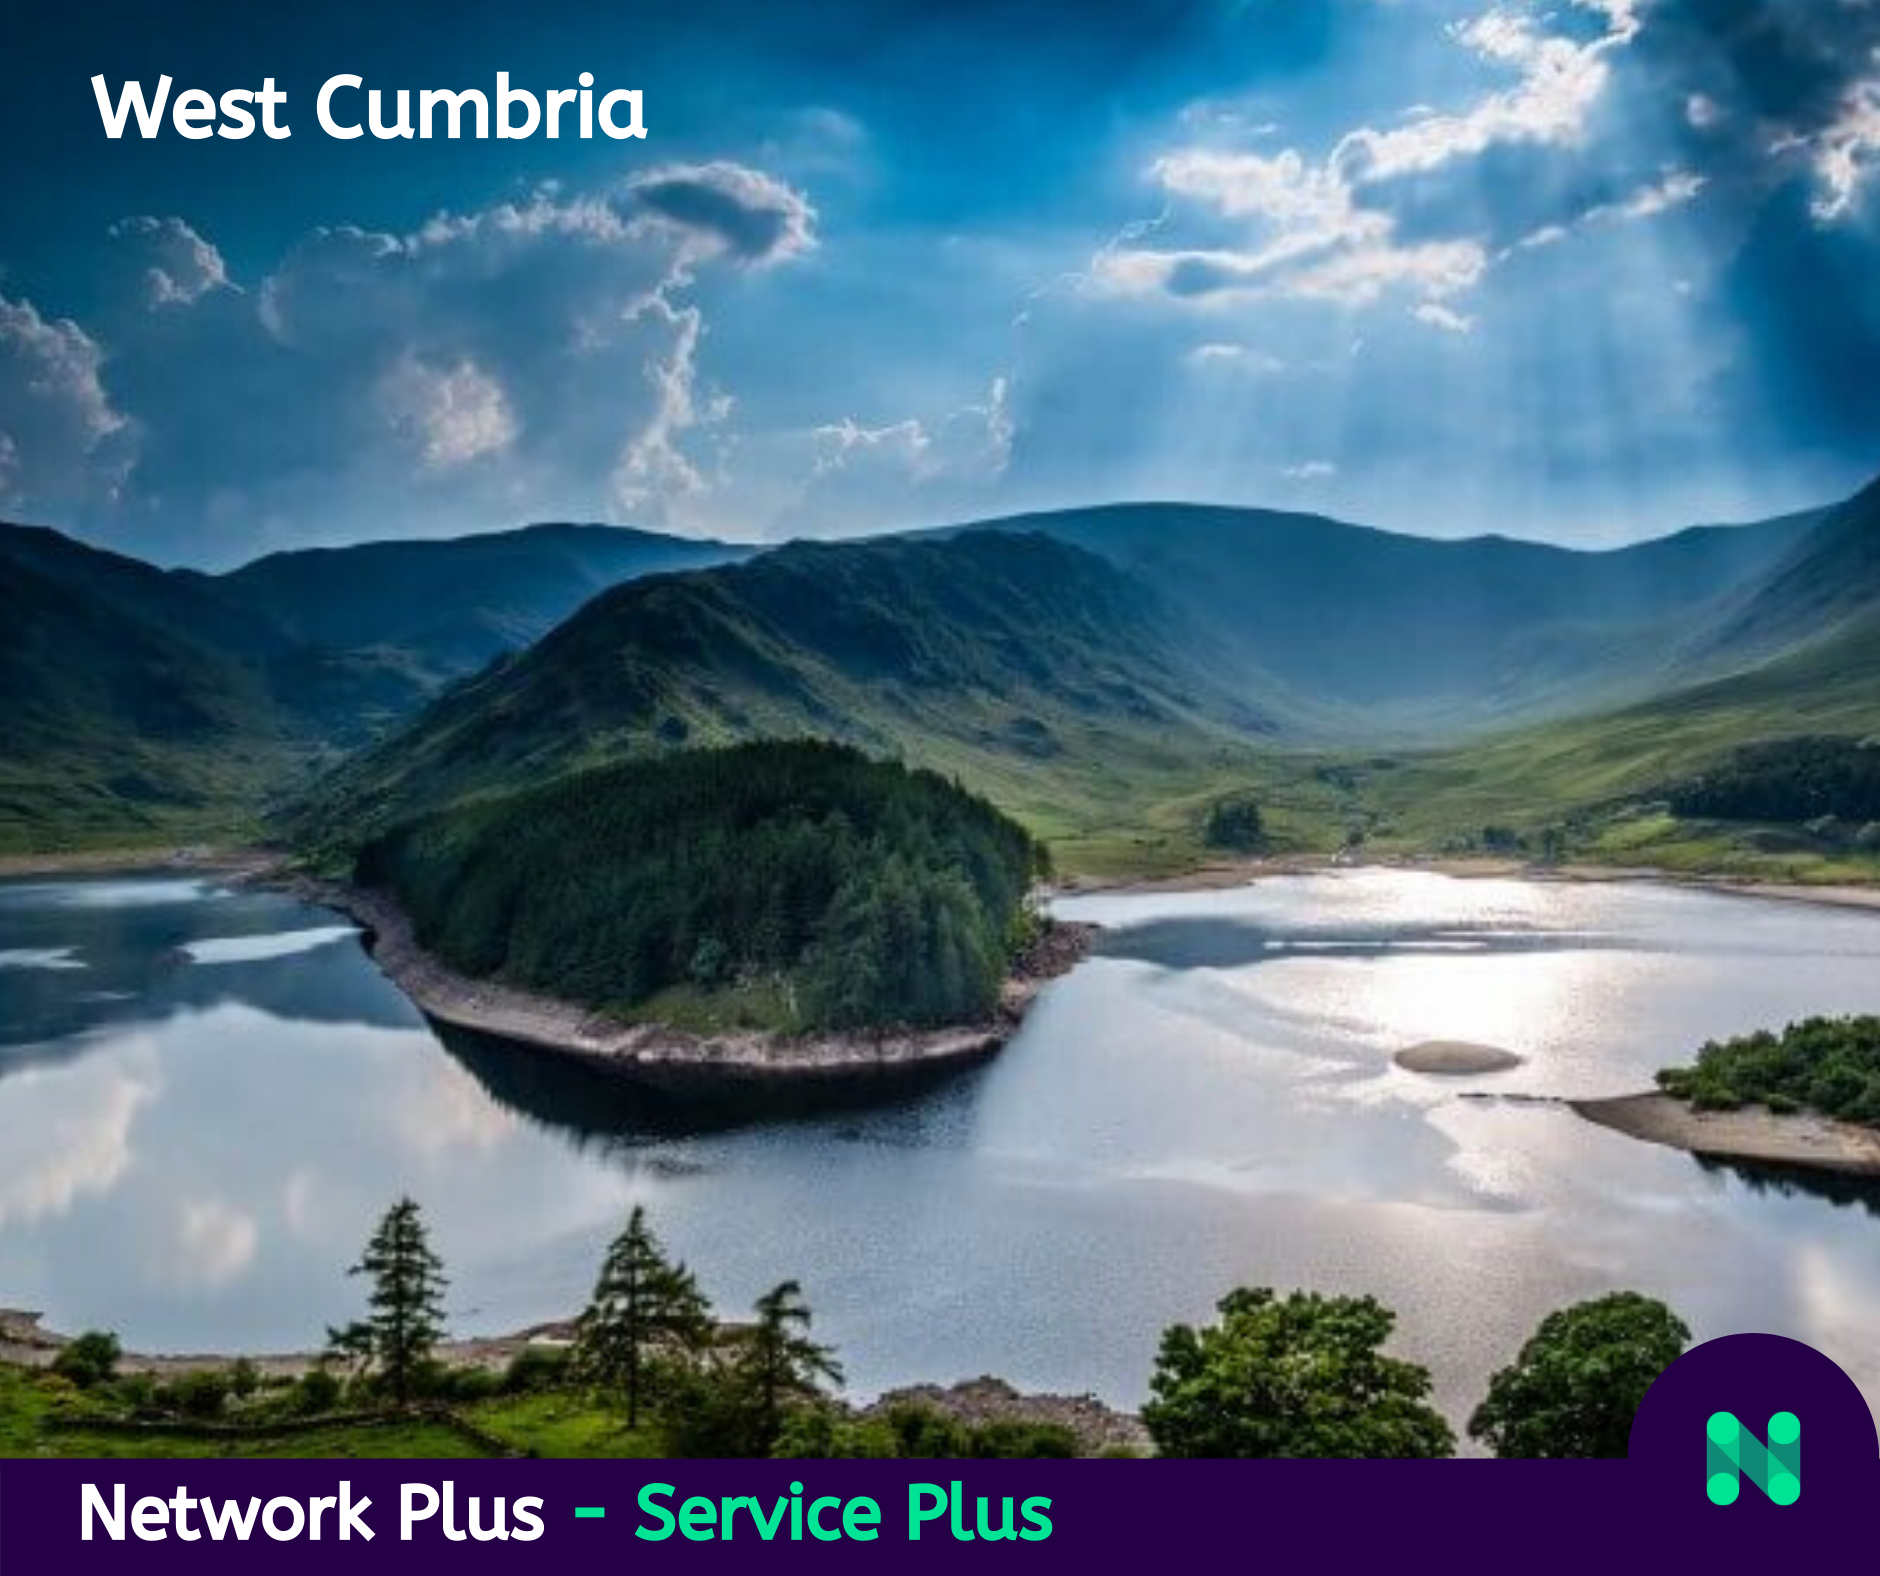 Network Plus supports United Utilities to renew 24km of water pipes in West Cumbria